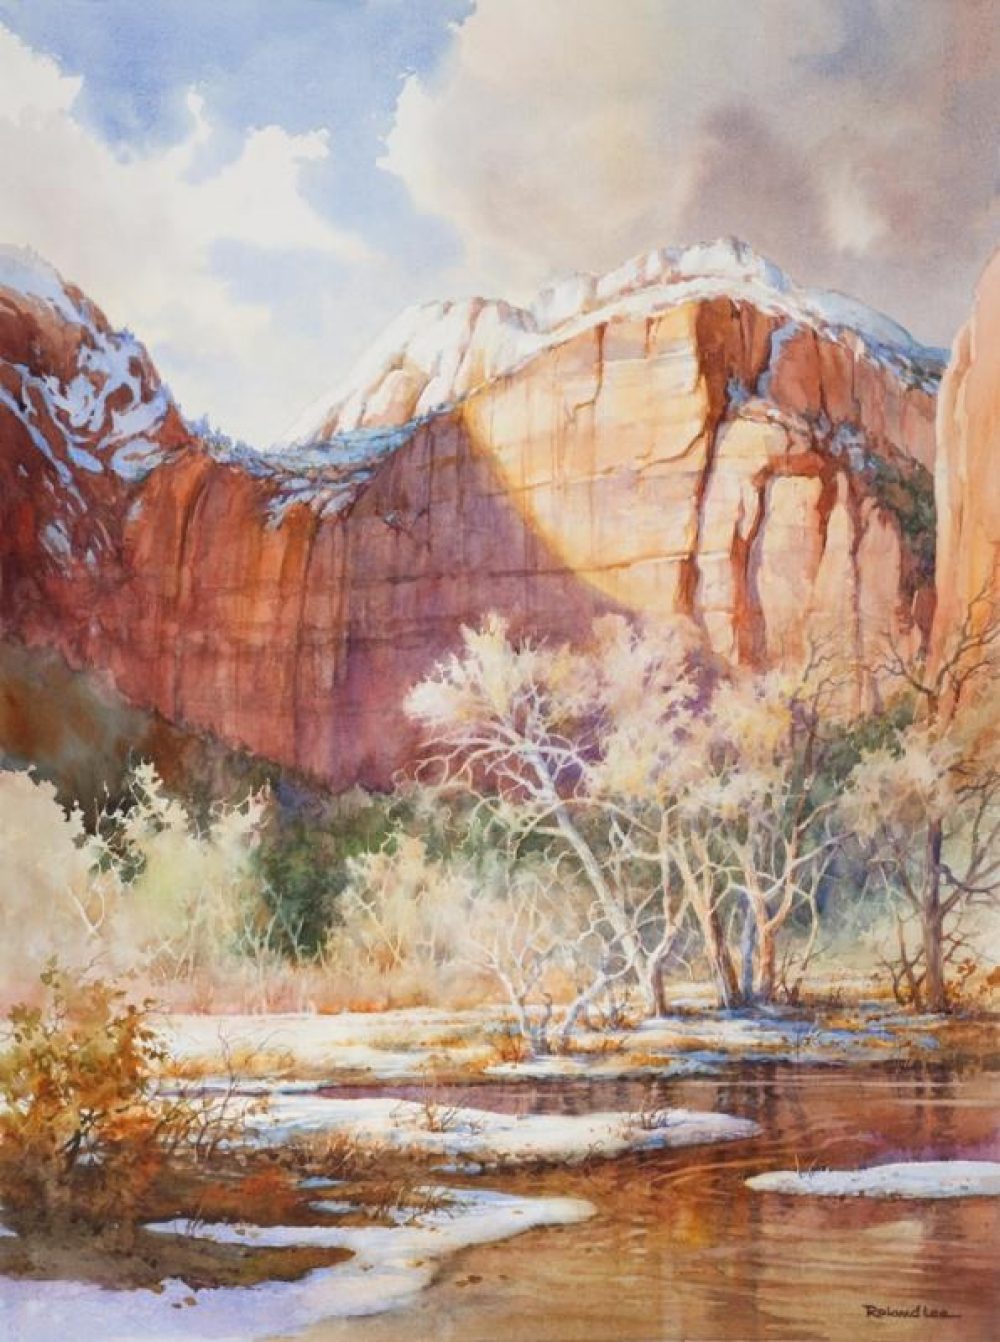 Canyon Snowfall - Zion - Watercolor Painting of Heaps Canyon in Zion National Park